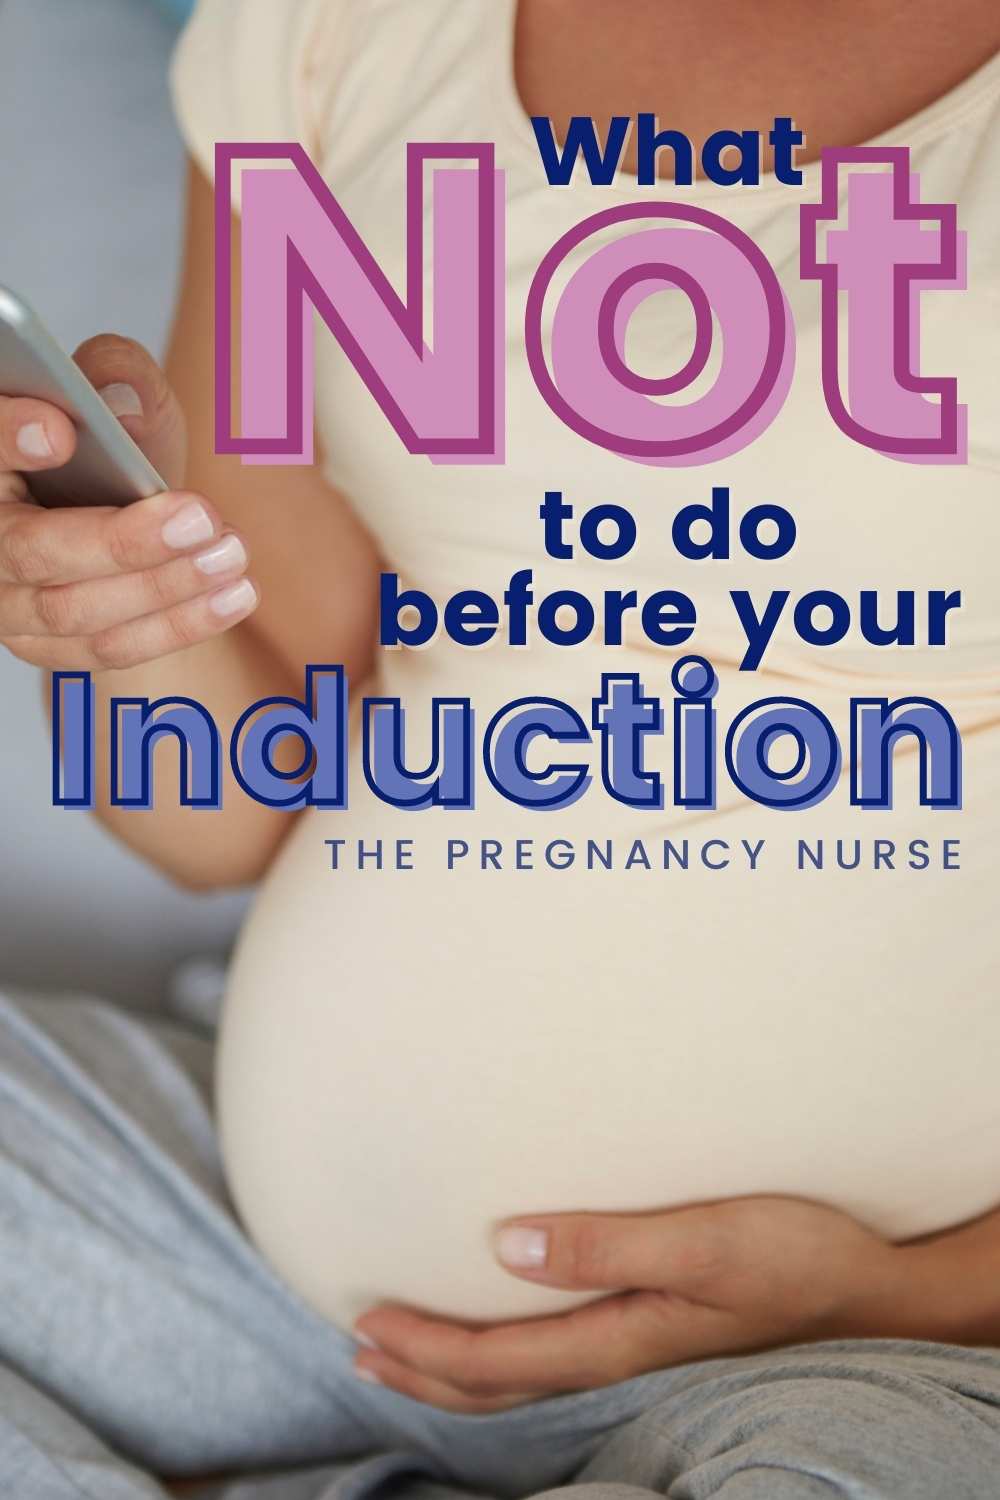 I've talked ALL about what to do before an induction, today I want to talk about 5 things to NOT do before your induction!